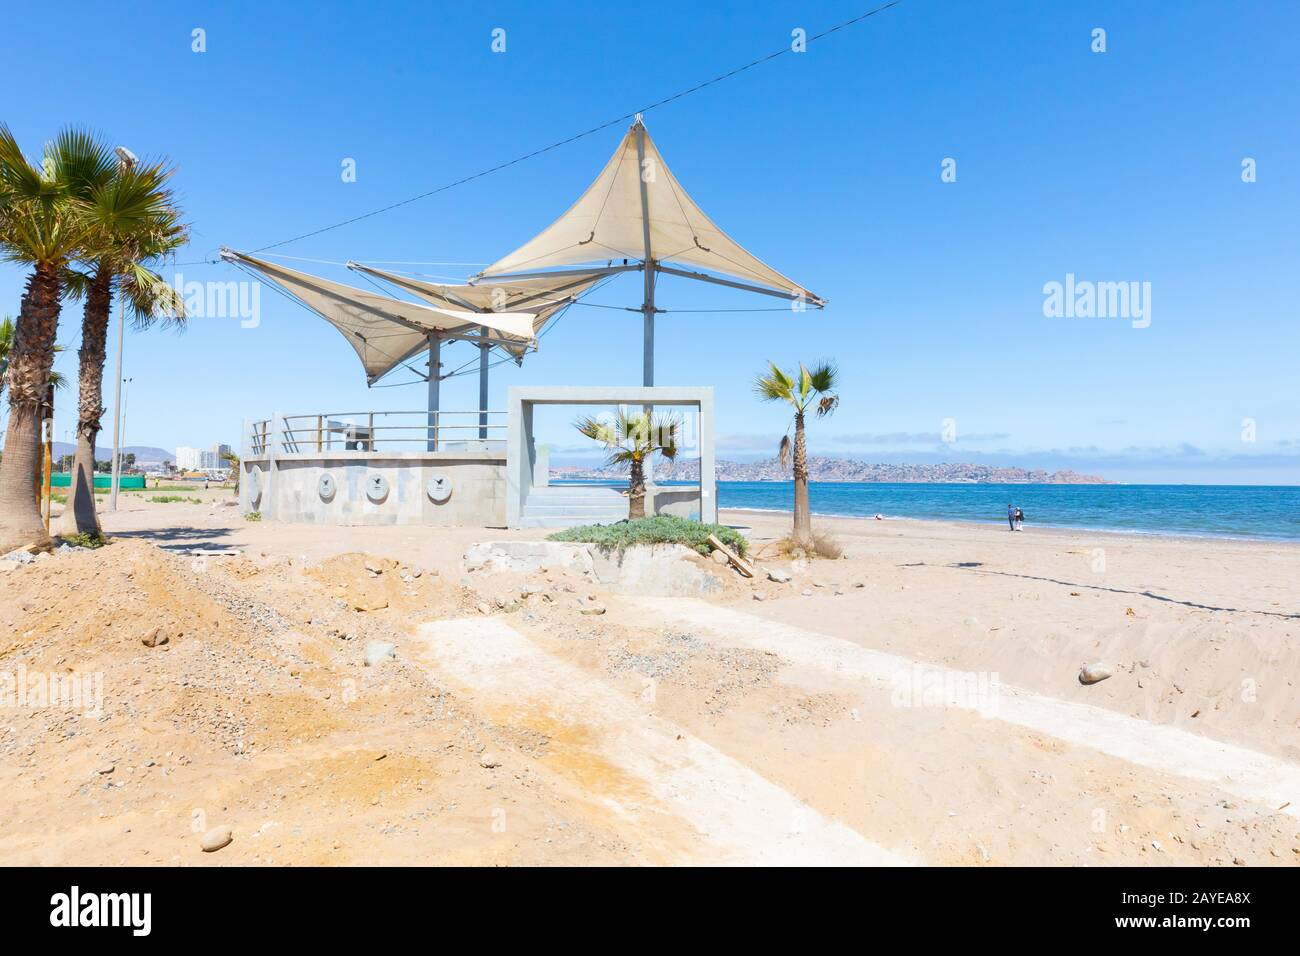 Chile Coquimbo stage for beach events Stock Photo